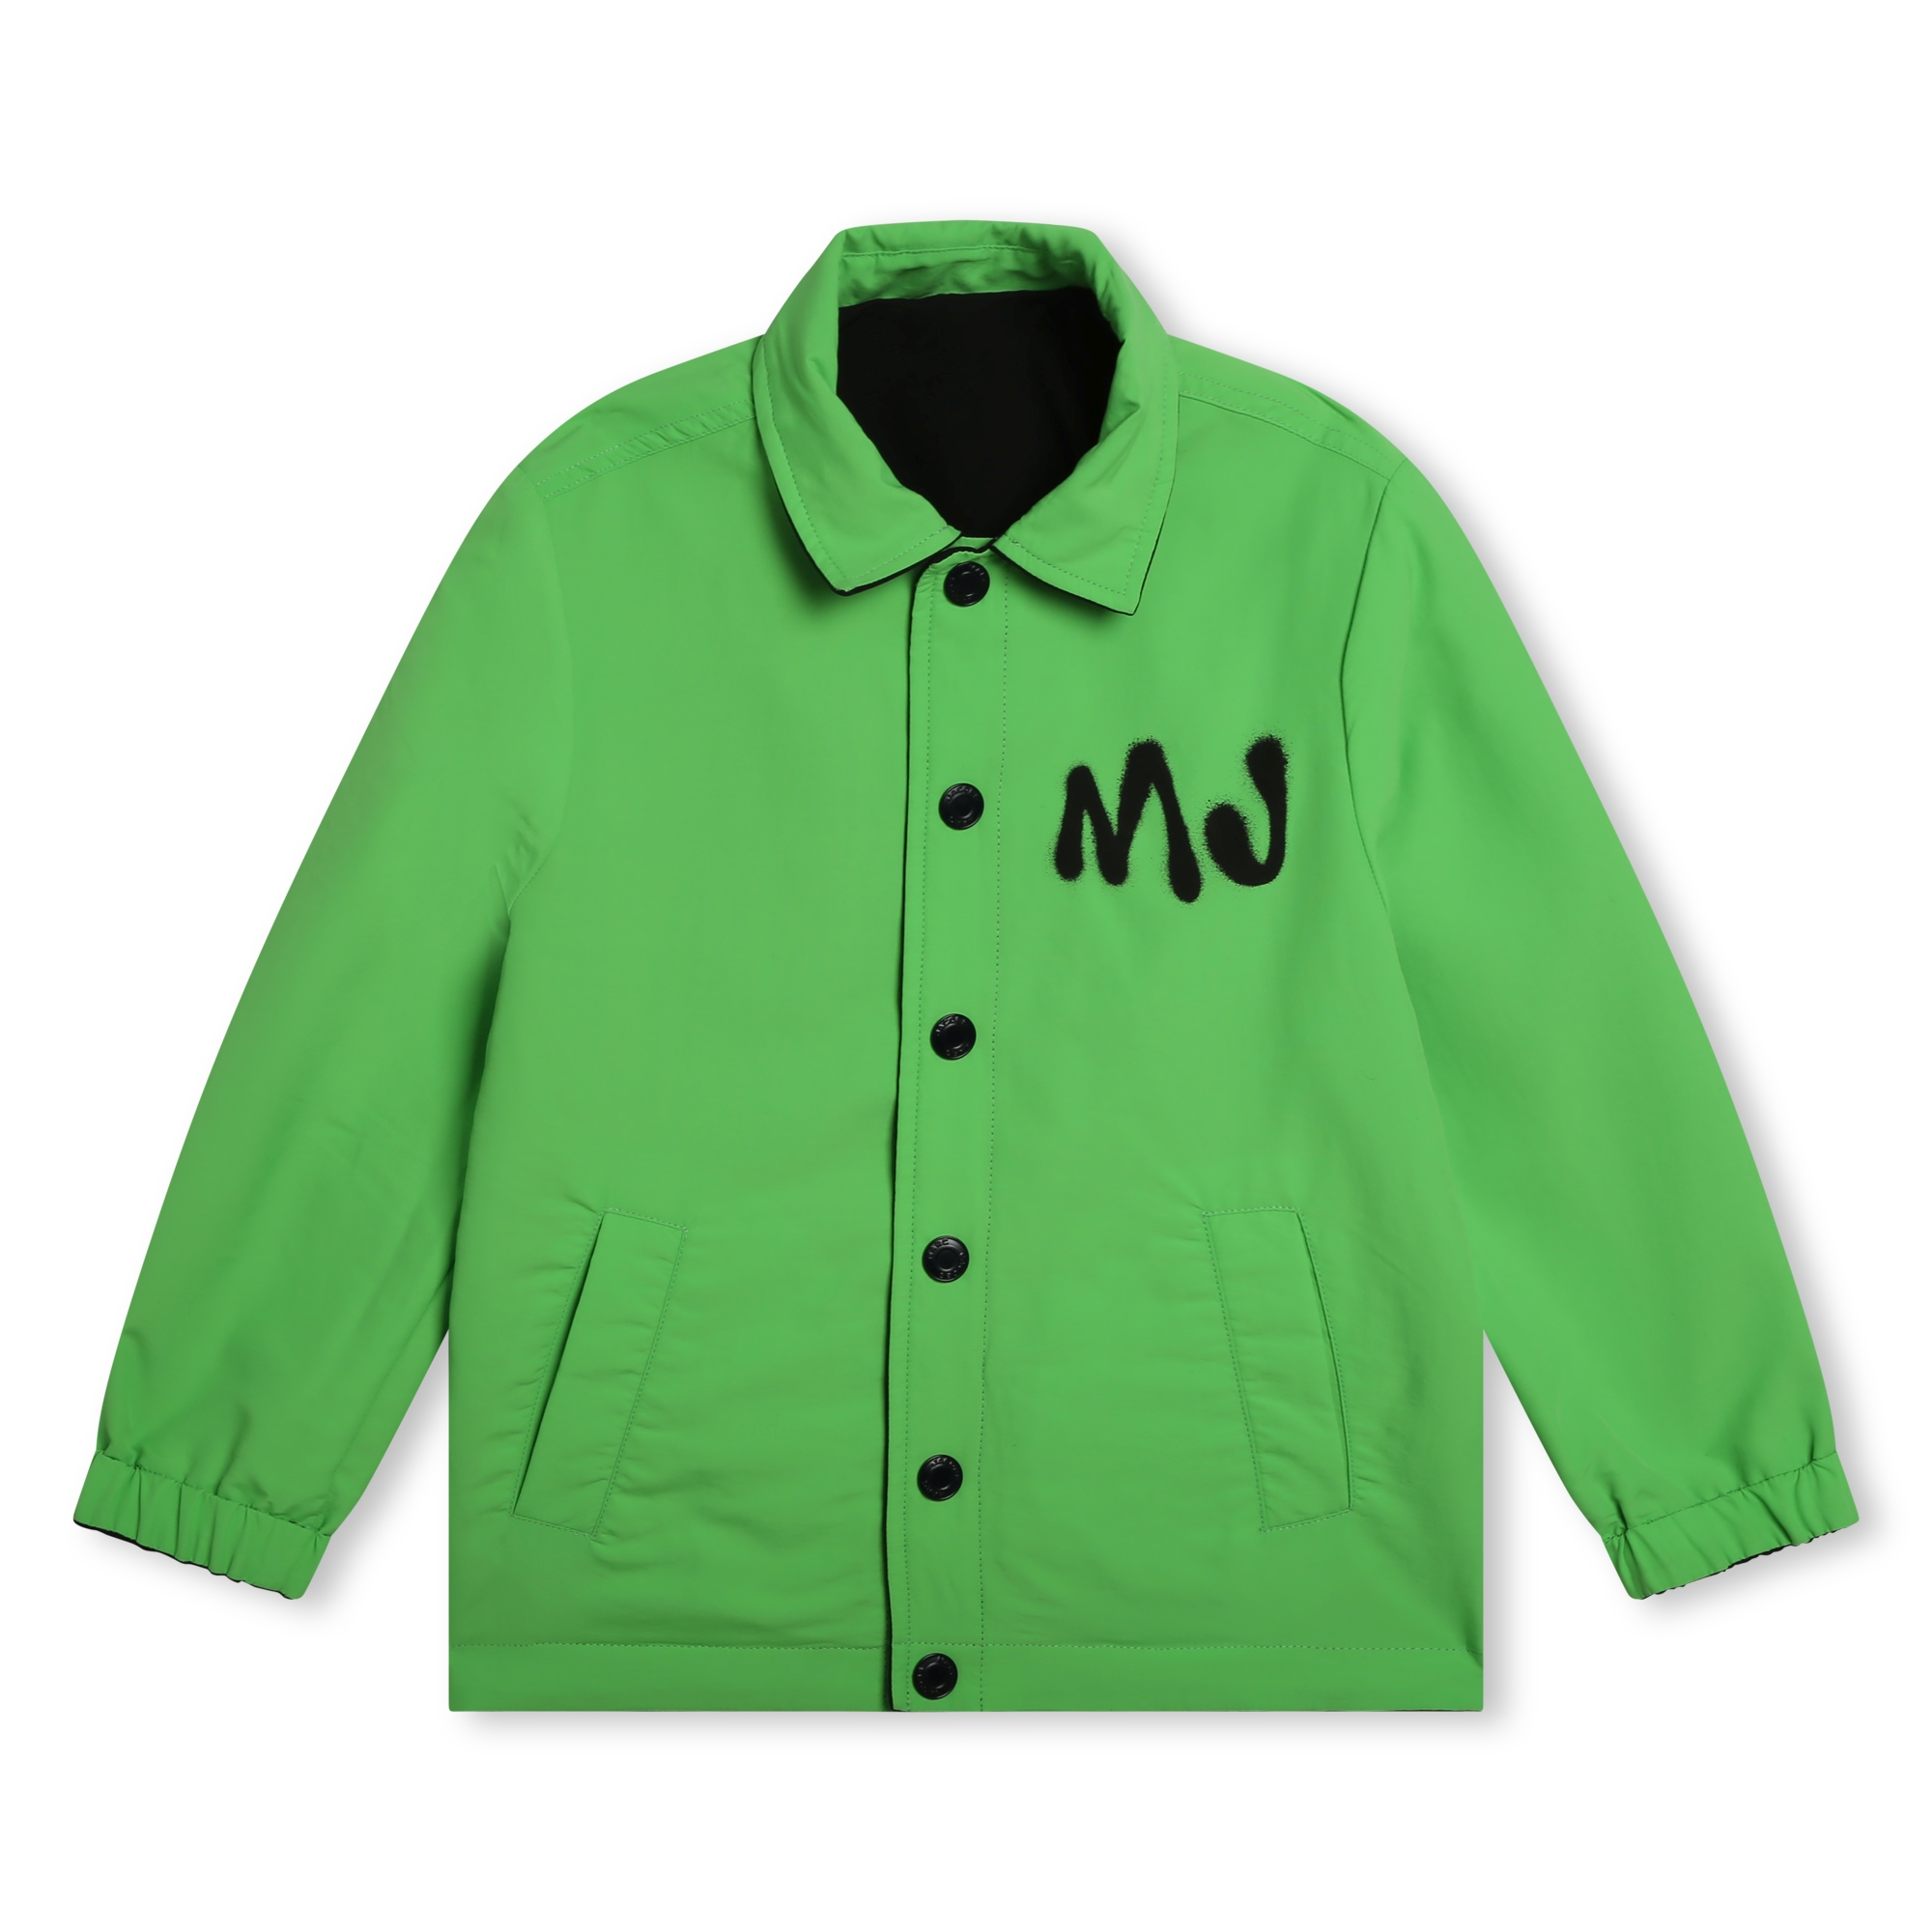 Reversible fabric jacket MARC JACOBS for BOY